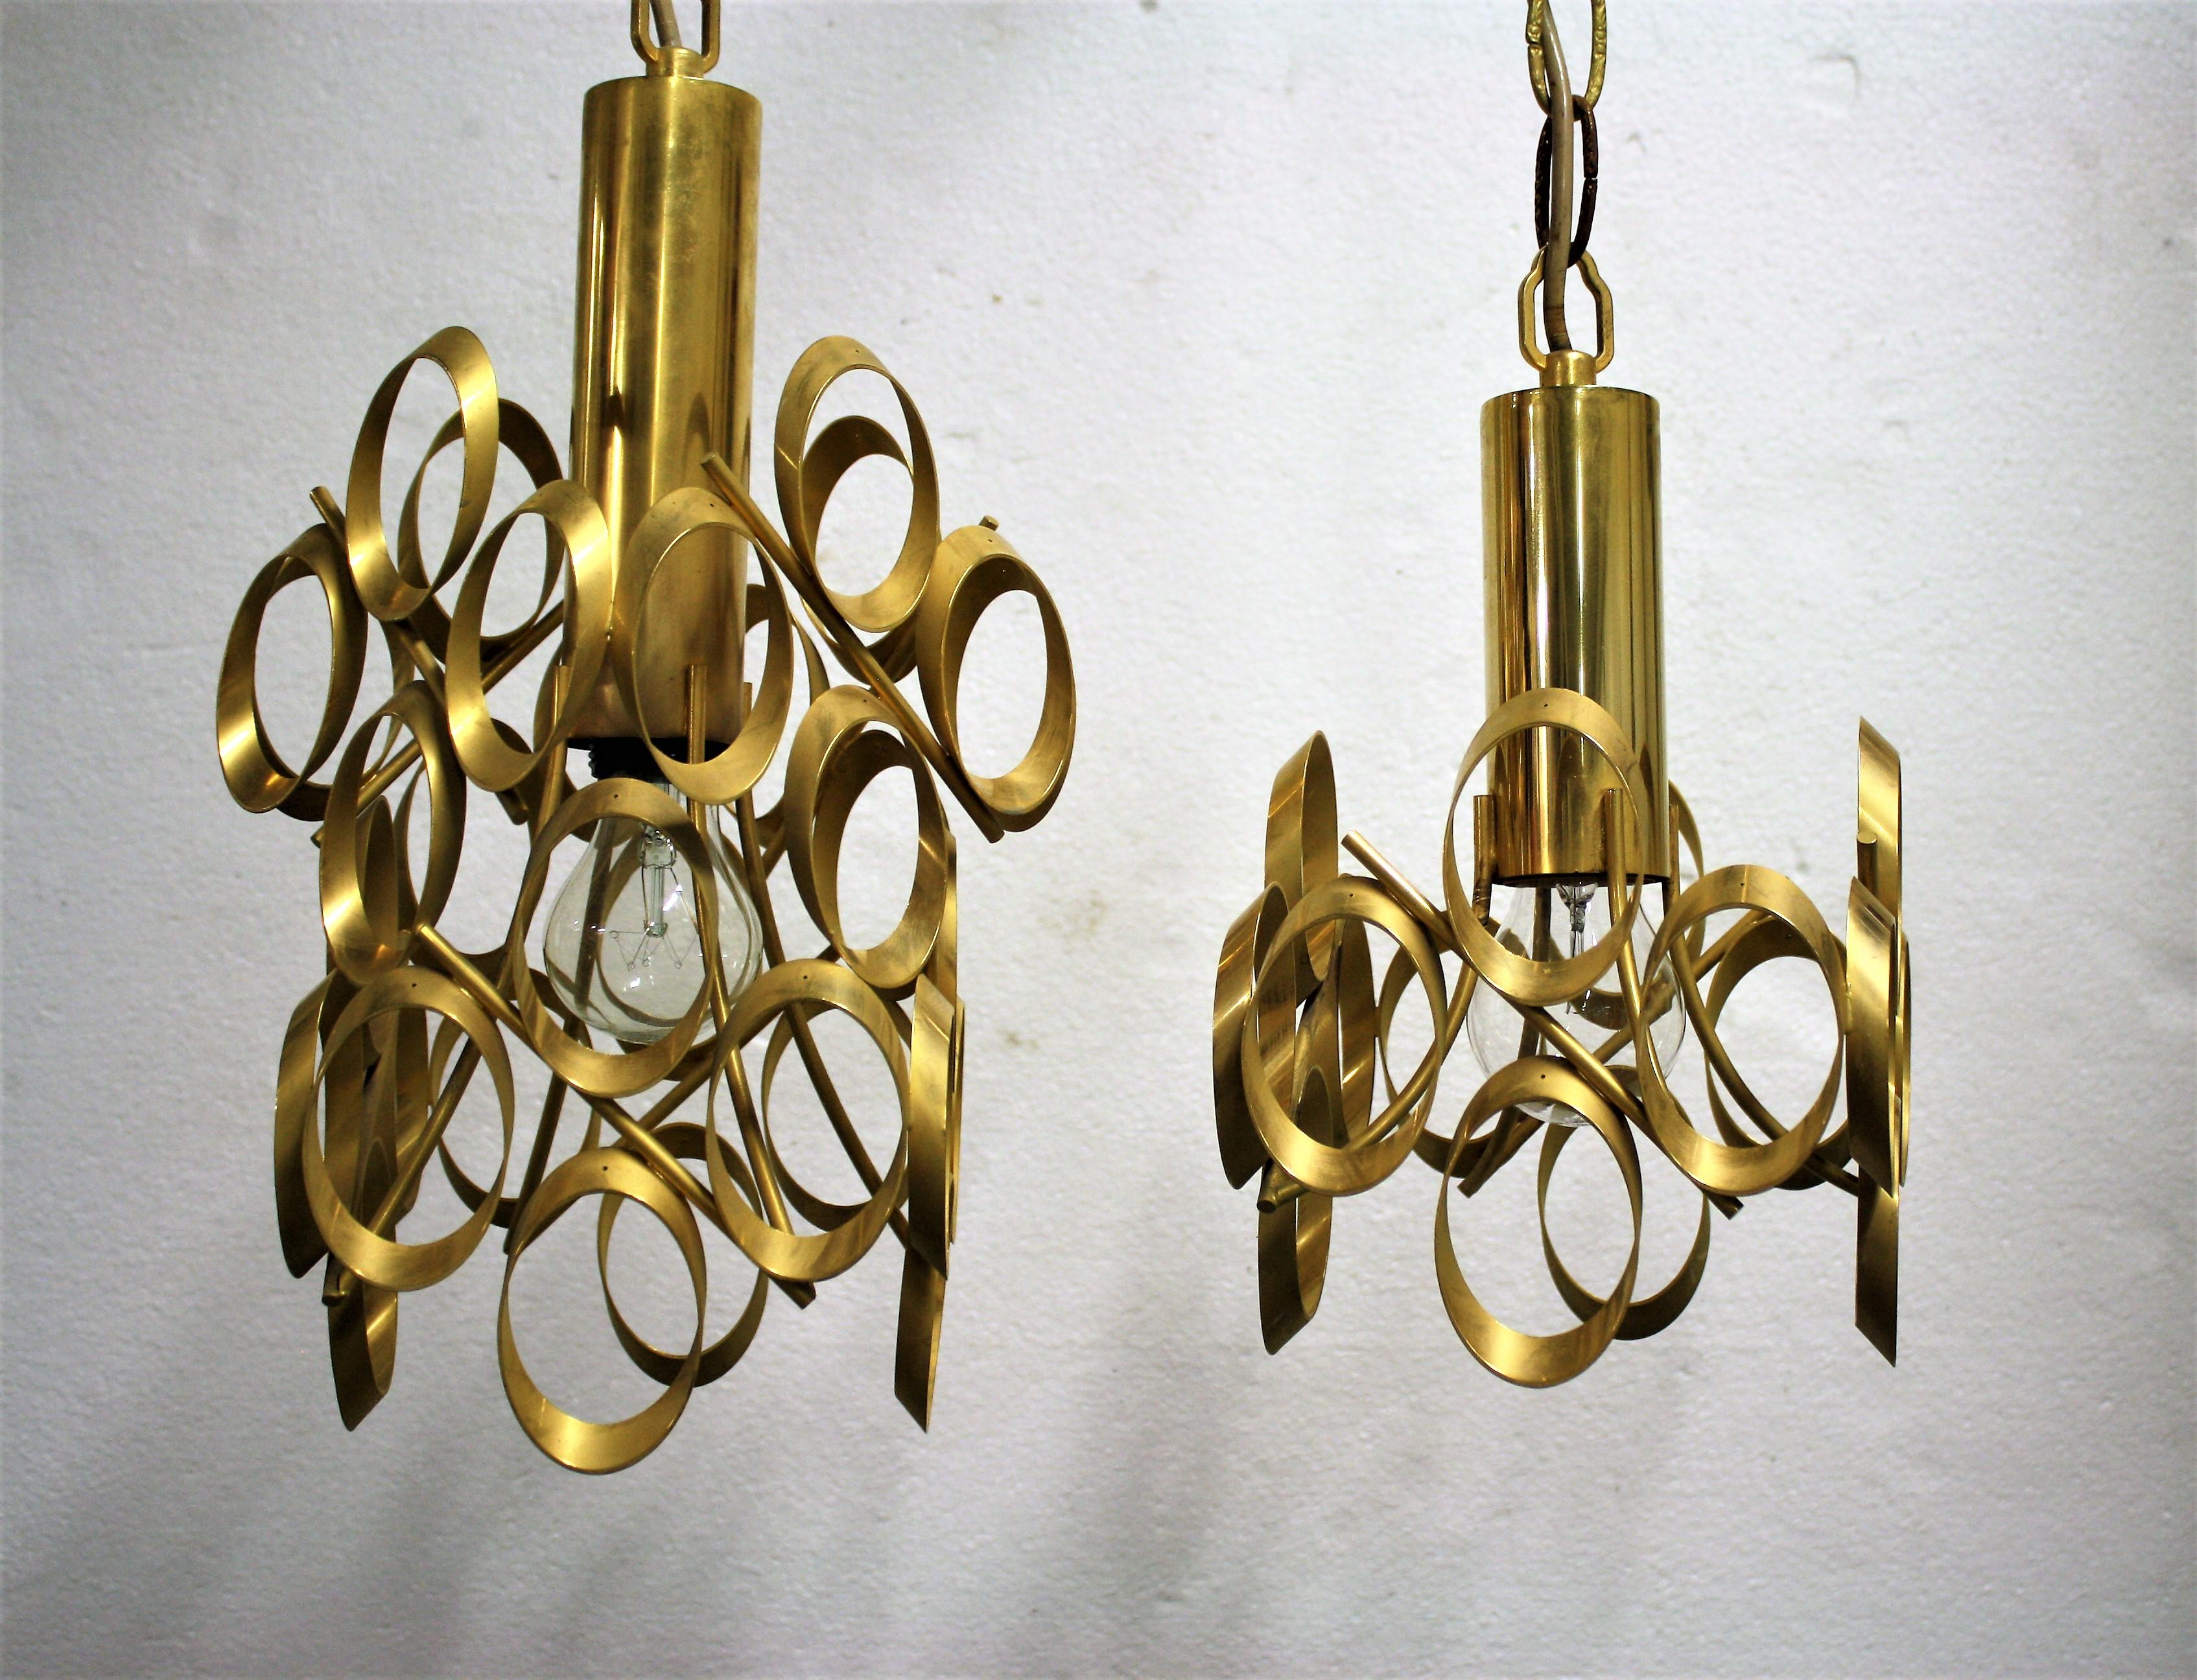 A pair of brass ring pendant lights design by Gaetano Sciolari.

These unique pendant lights are rare and come as a pair.

They can be hung together above a table or counter at a different height to create the best effect.

These well designed